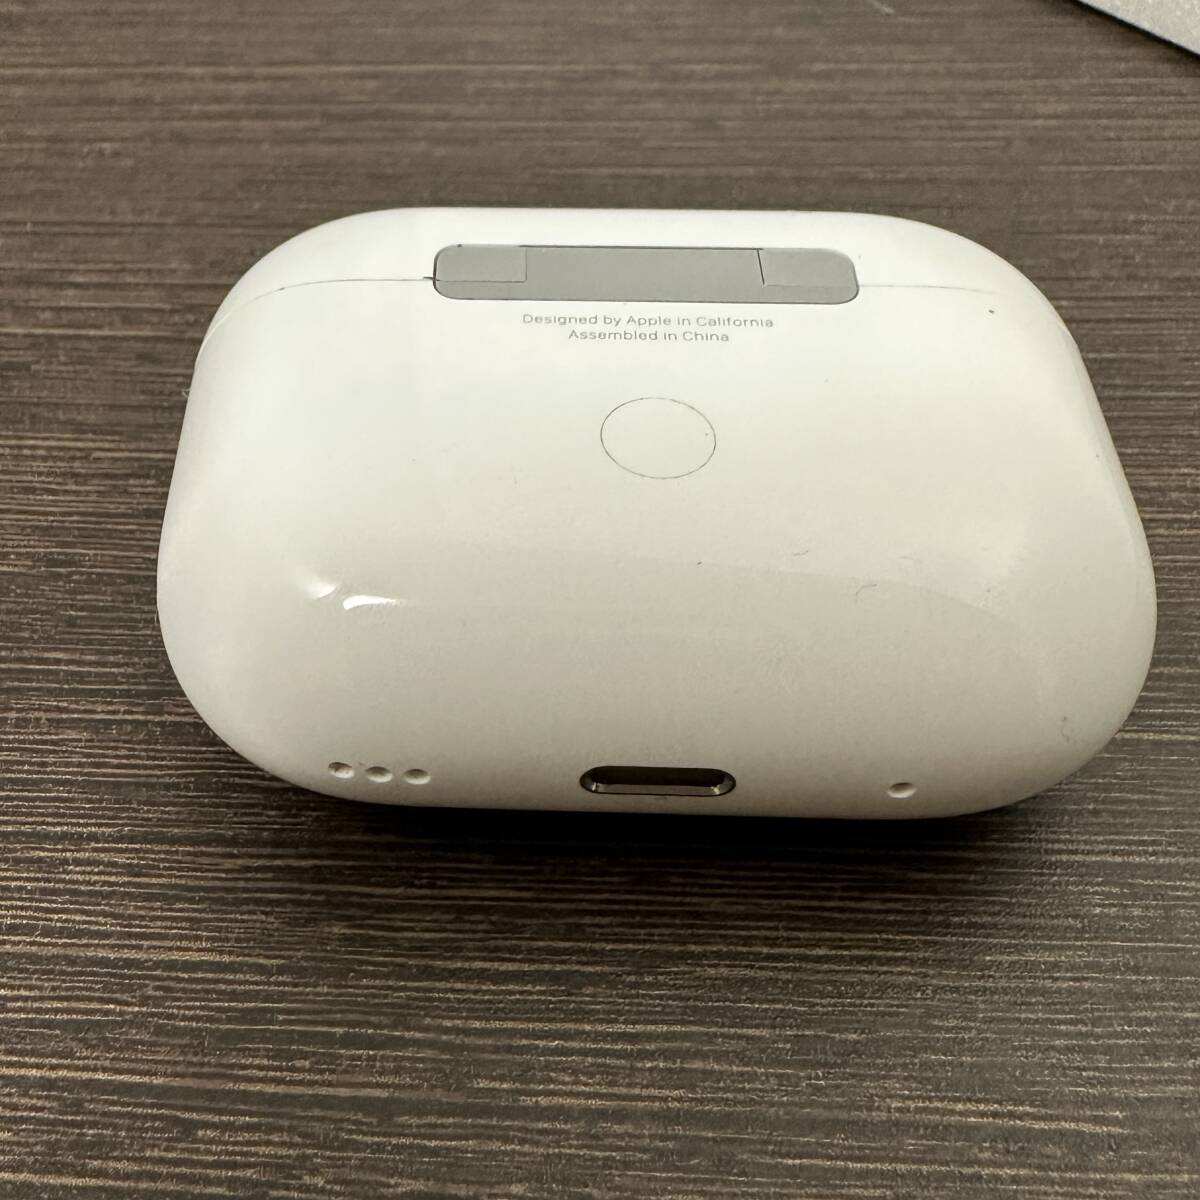 ☆★H1587【送料込み】Apple AirPods Pro MQD83J/A A2700 A2698 A2699 第2世代 AirPods Pro MagSafe 充電ケース ケーブル・箱付きの画像9